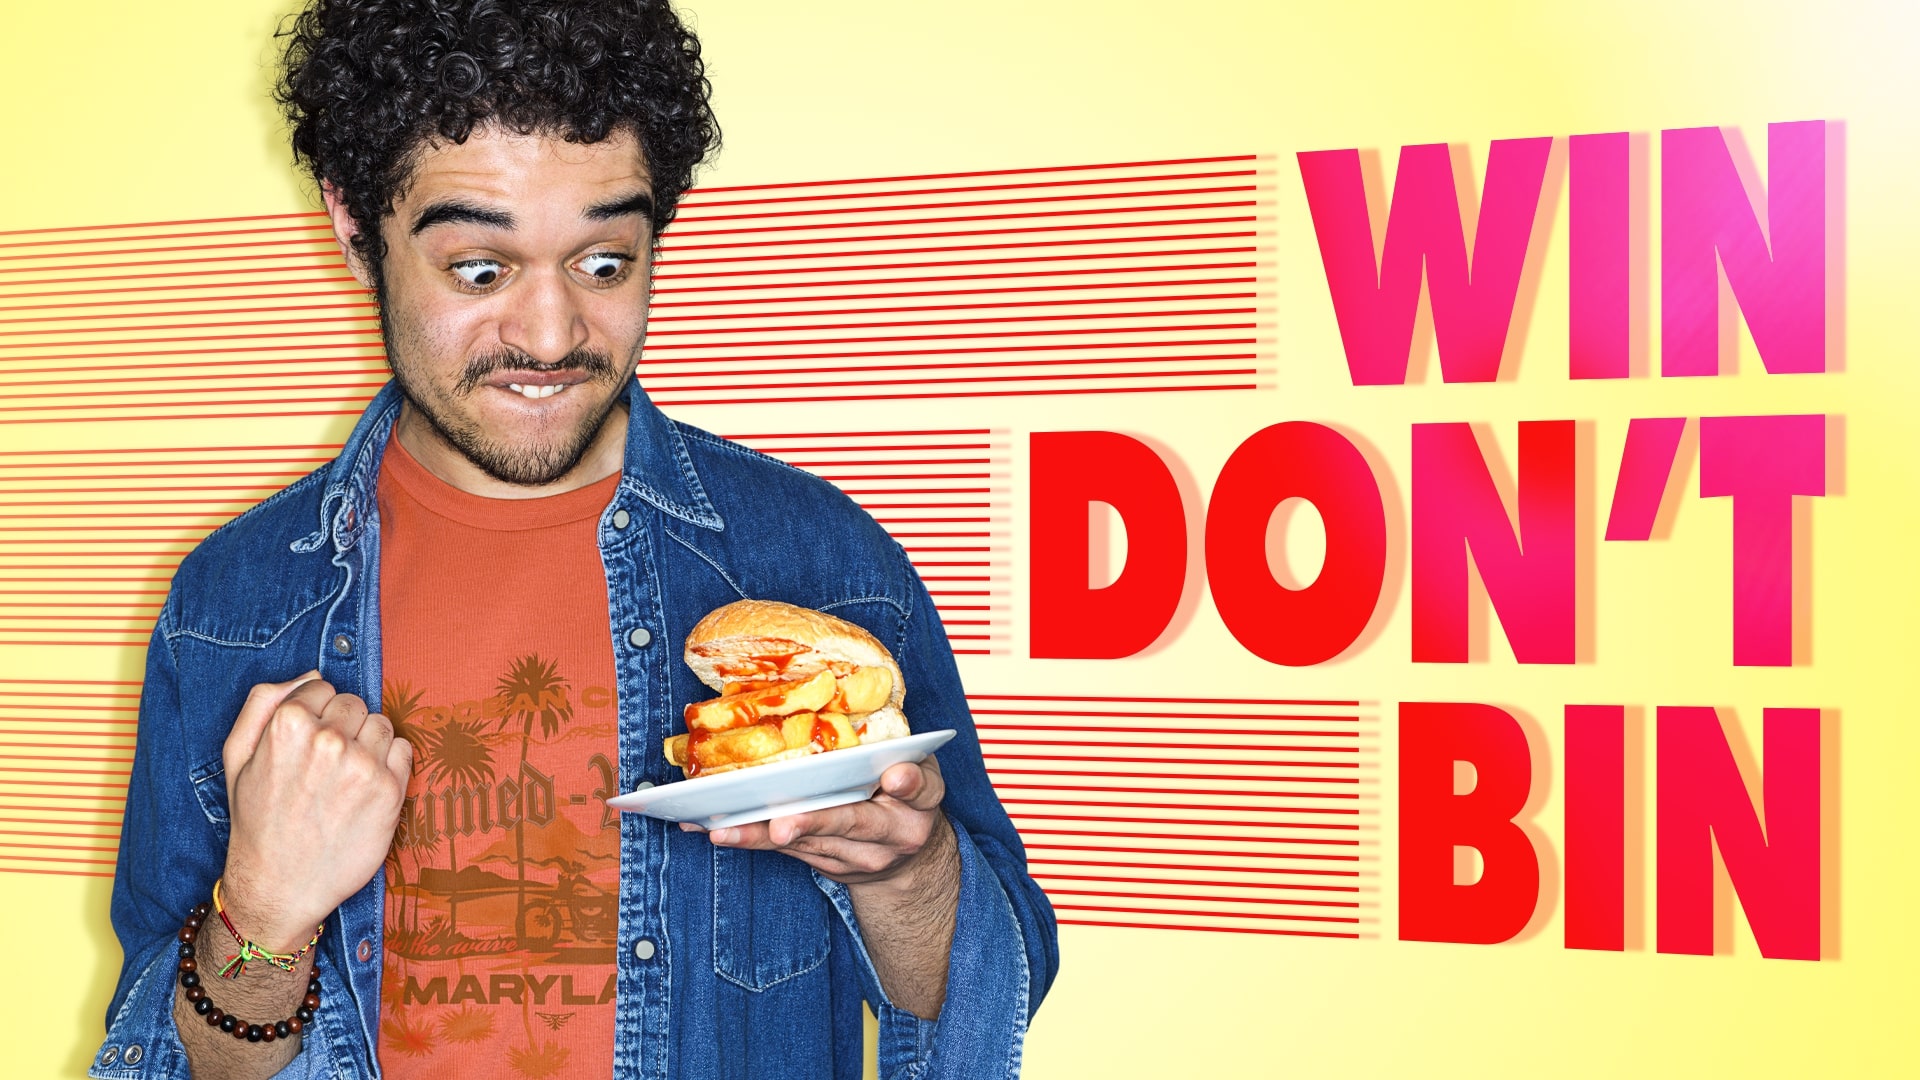 Win Don't Bin - energetic design with a photo of a young man excitedly looking at a chip butty